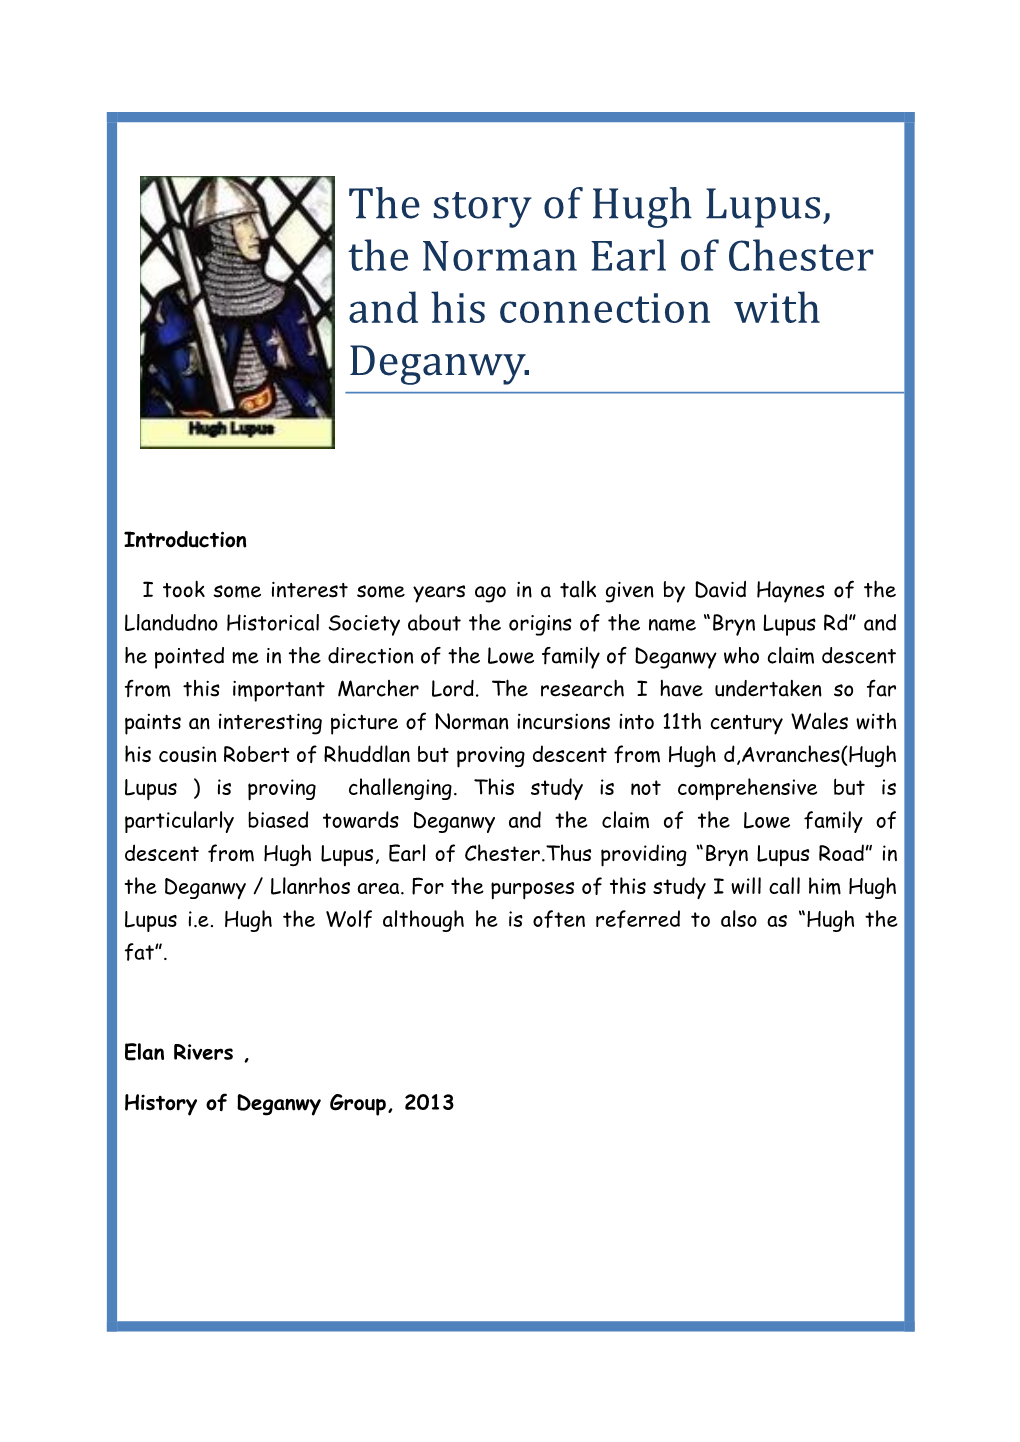 The Story of Hugh Lupus, the Norman Earl of Chester and His Connection with Deganwy